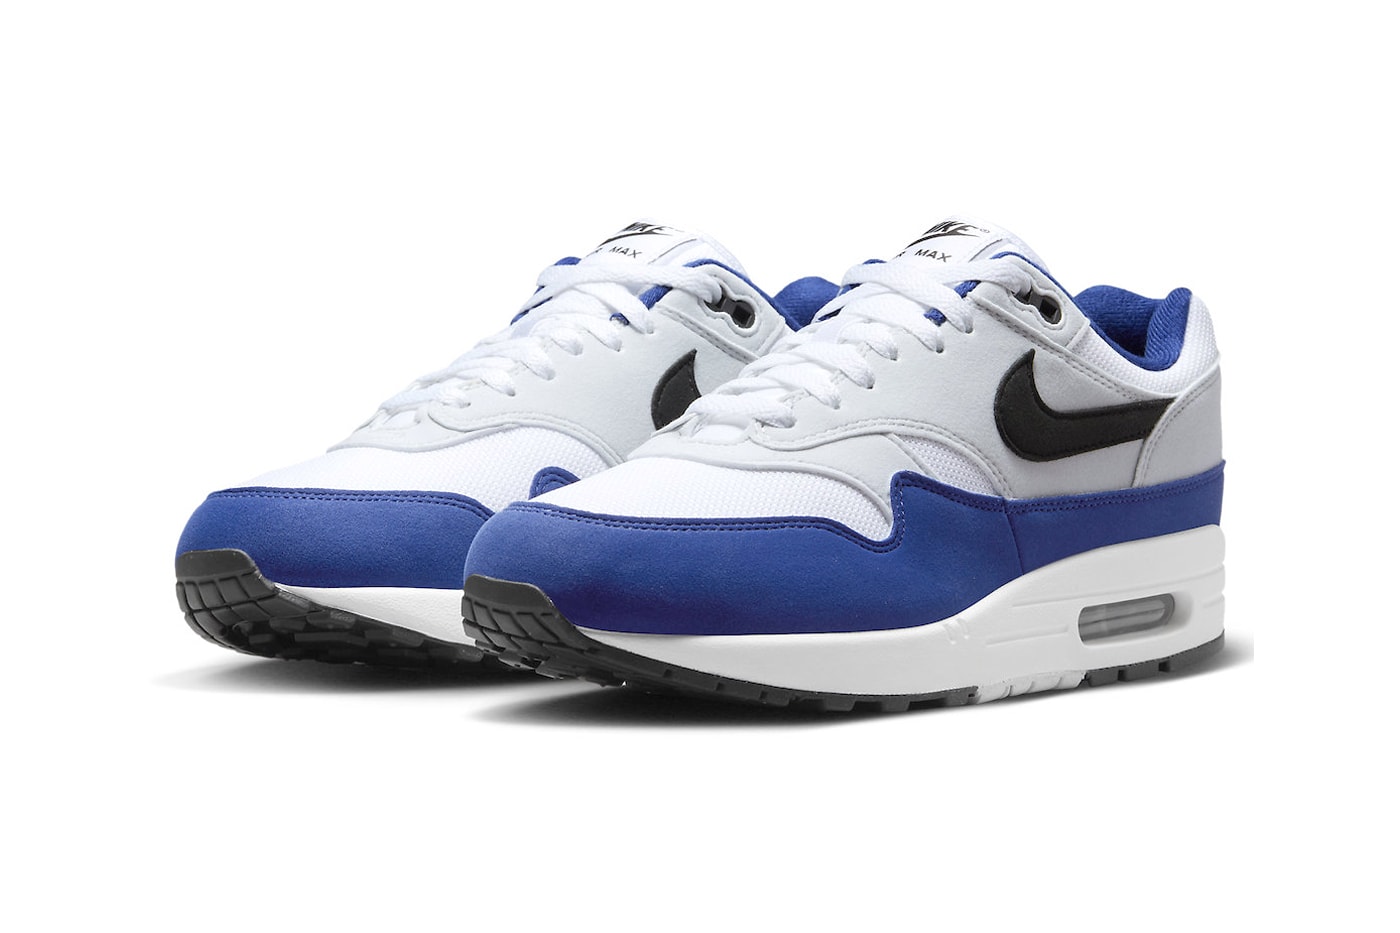 Official Look Nike Air Max 1 "Deep Royal Blue" FD9082-100 White/Black-Deep Royal Blue shoes swoosh everyday sneakers runners running shoes comfortable